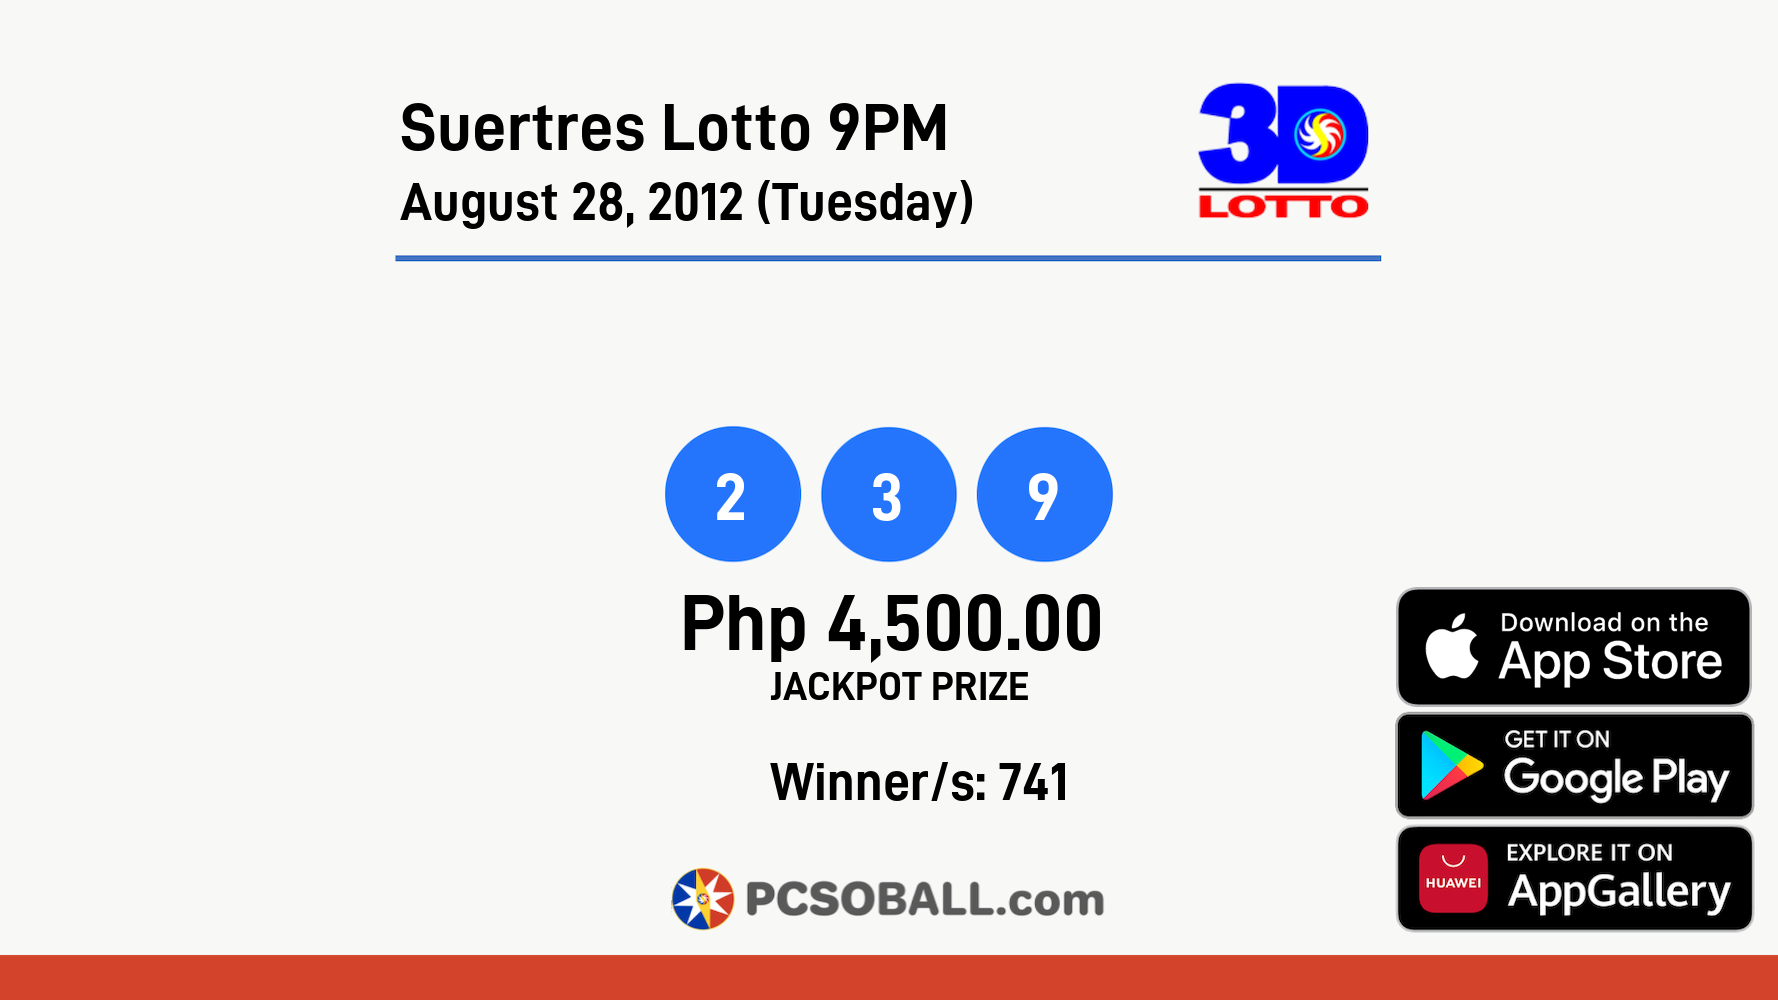 Suertres Lotto 9PM August 28, 2012 (Tuesday) Result